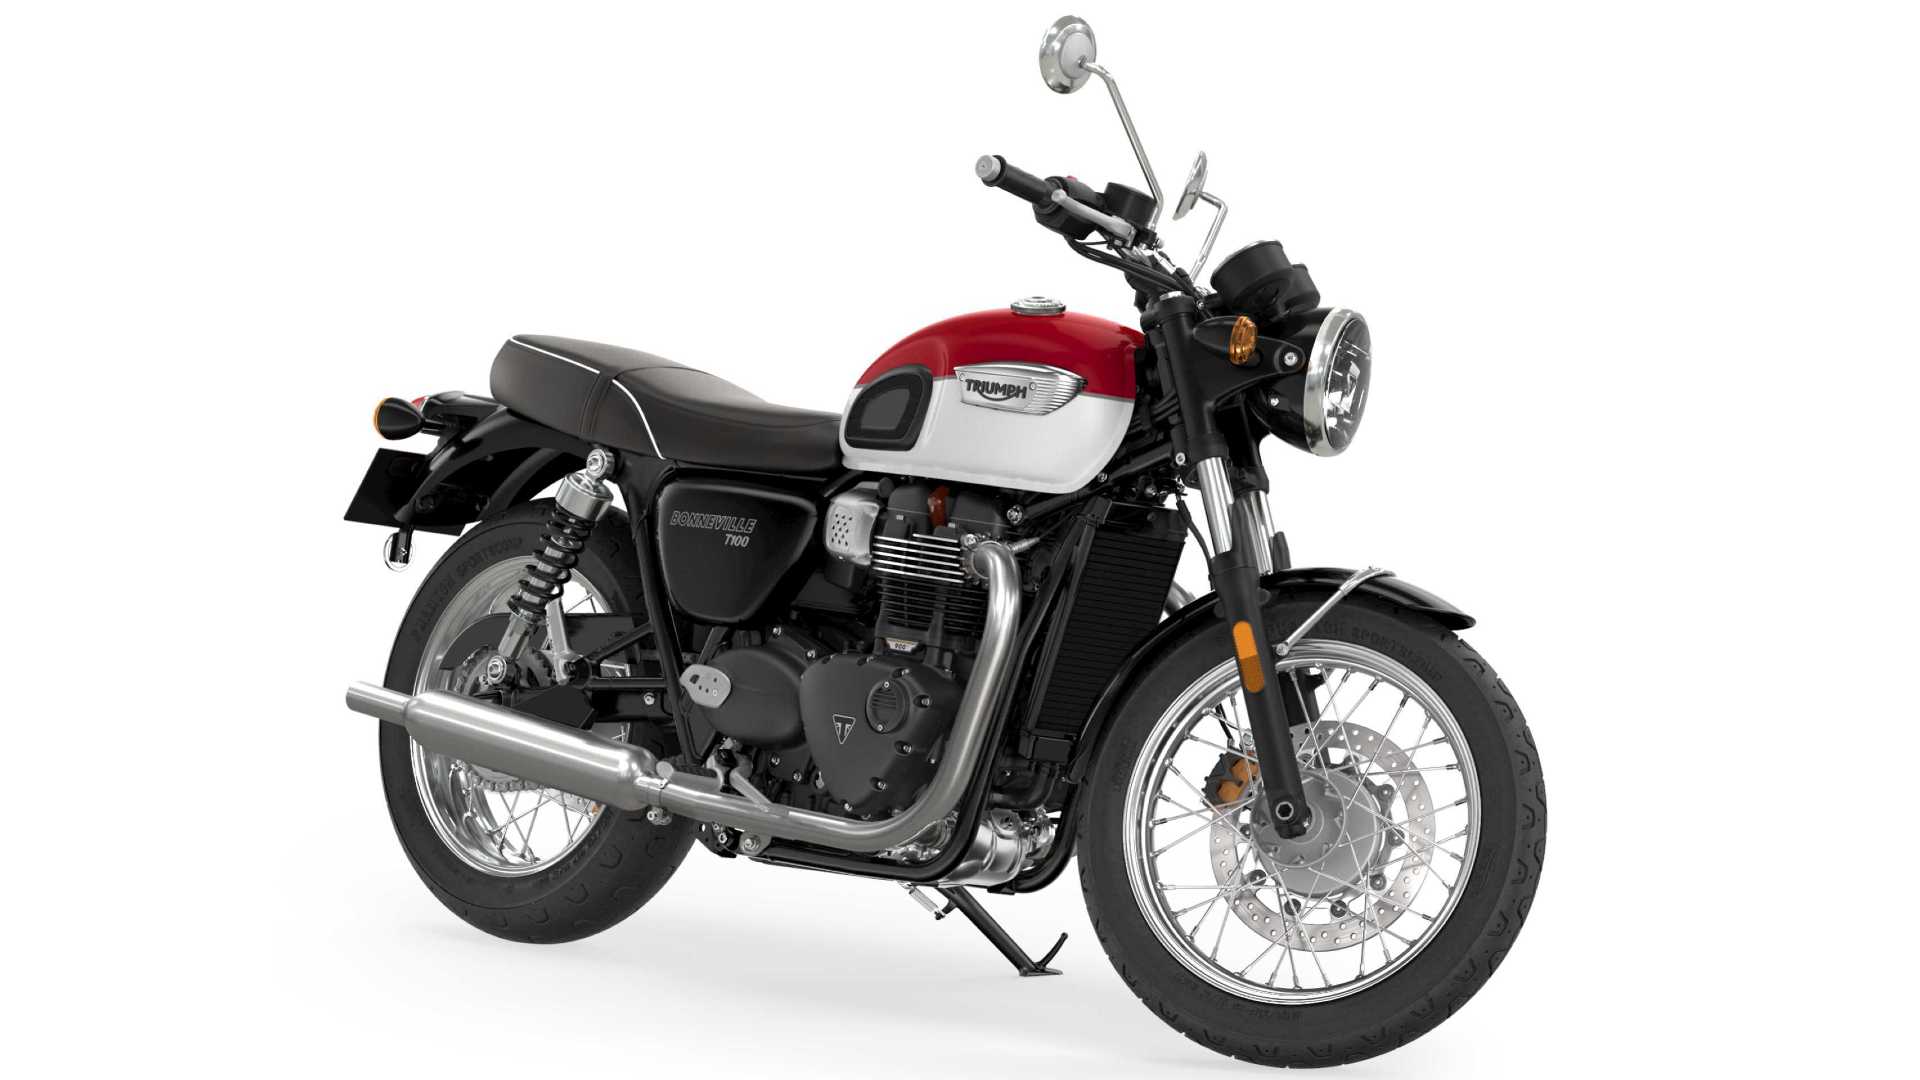 The 2021 Triumph Bonneville T100 benefits from a 10 hp rise in power output. Image: Triumph Motorcycles